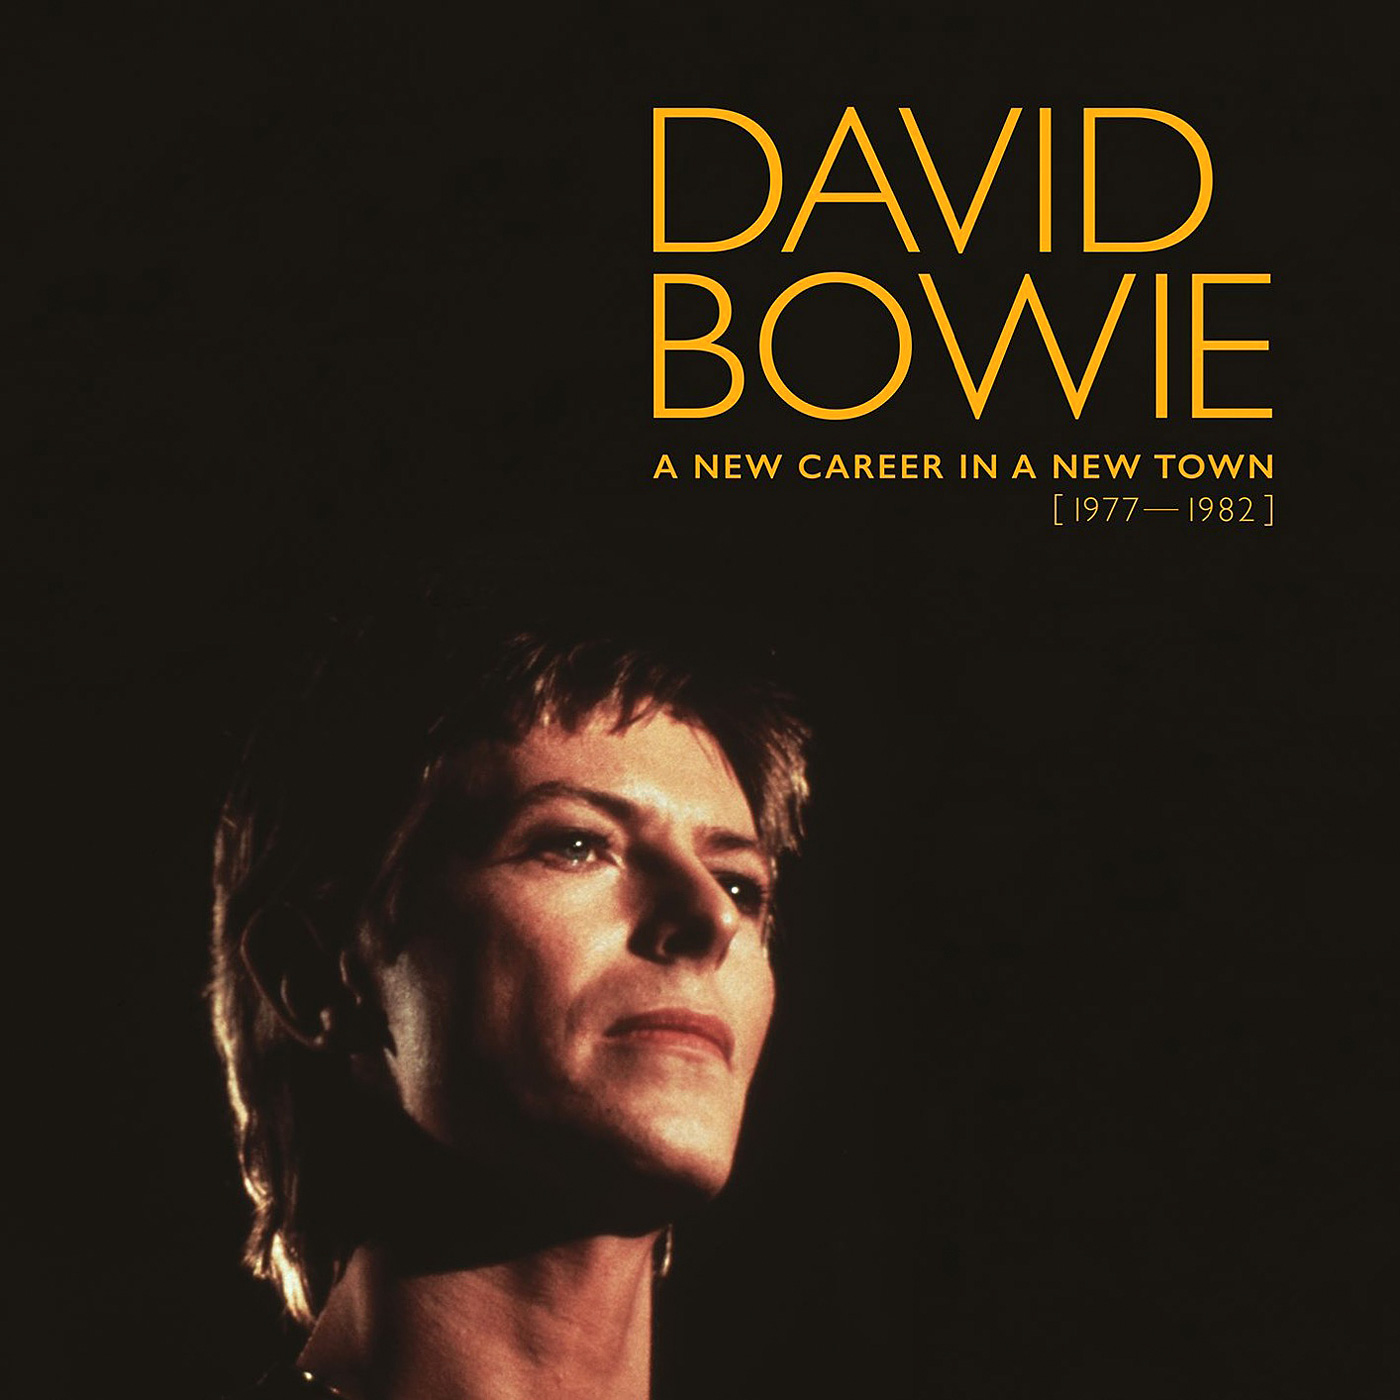 David Bowie - A New Career In A New Town (1977-1982) (2017) [FLAC 24bit/192kHz]